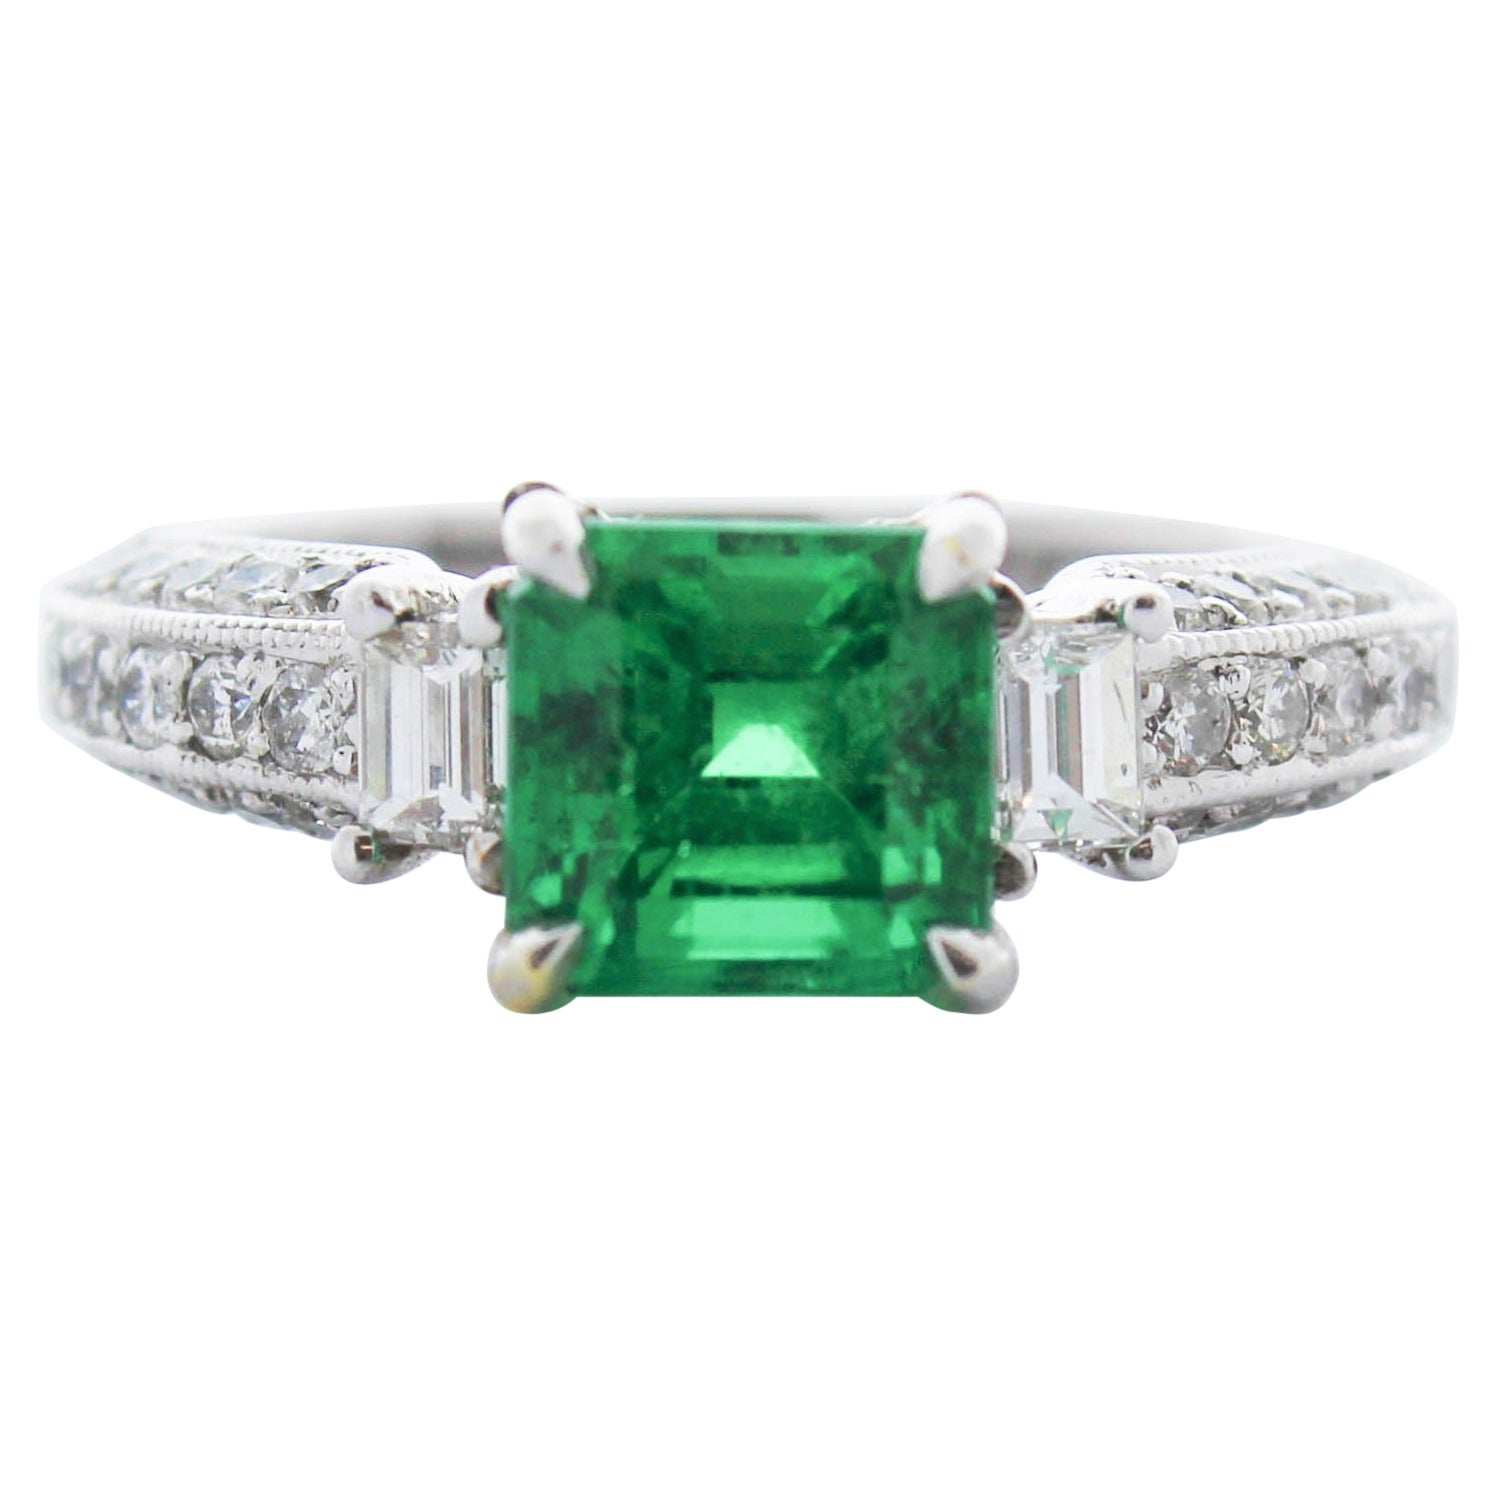 1.85 Carat Square Emerald & Diamond Cocktail Ring in 14 K White Gold For Sale